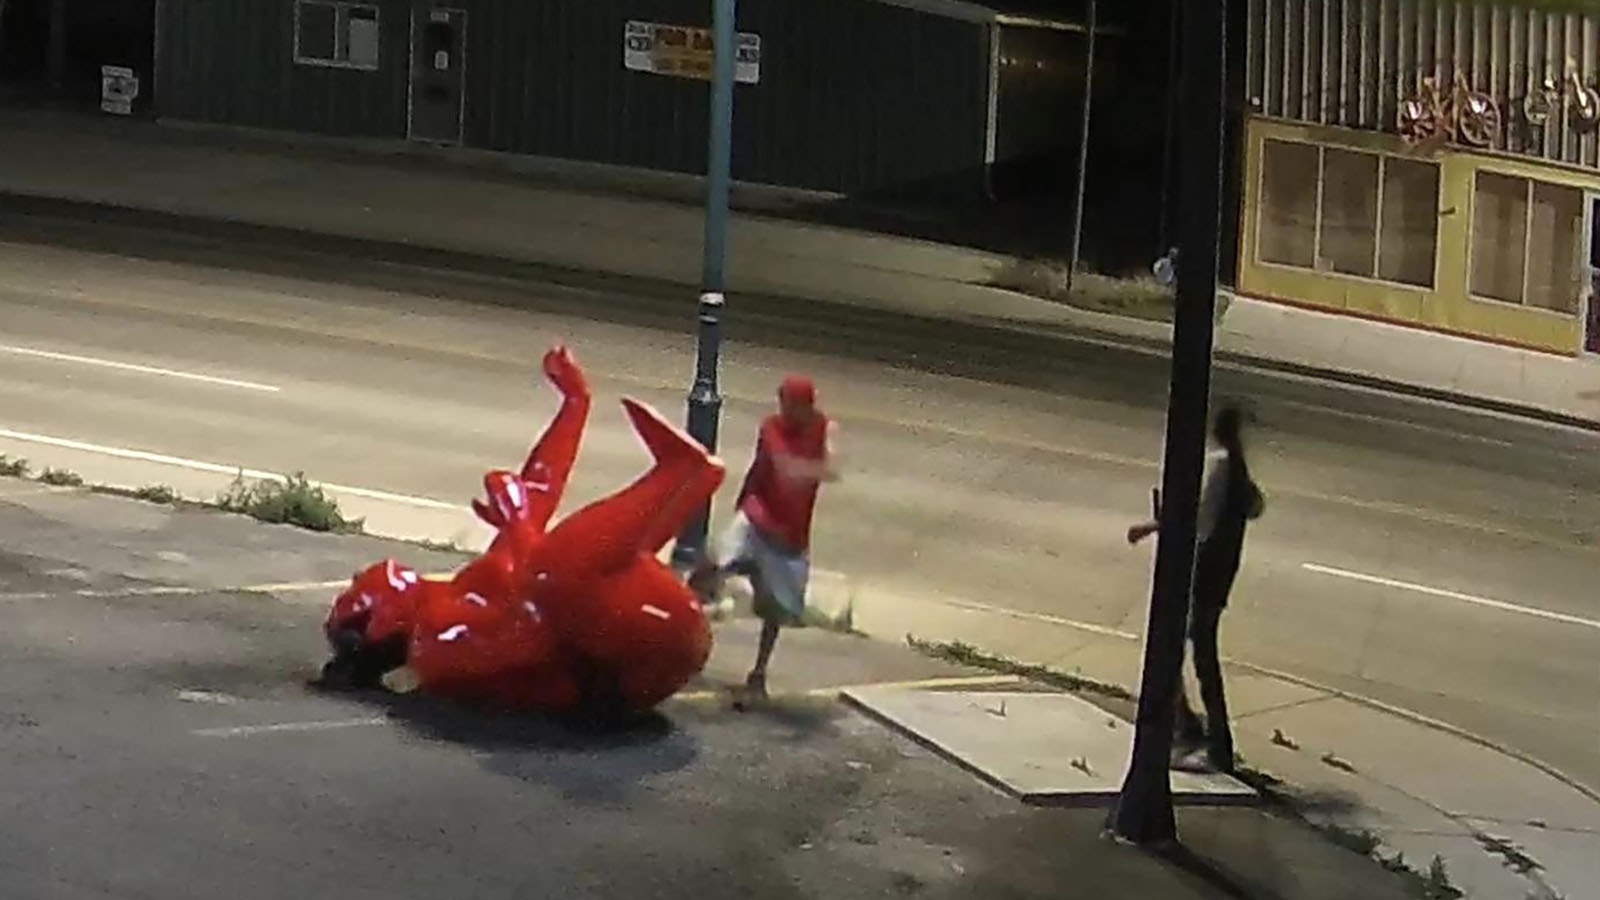 This photo from a surveillance video outside Ichiban Japanese Steakhouse in Riverton shows a pair of vagrants vandalizing its large red sumo wrestler statue.